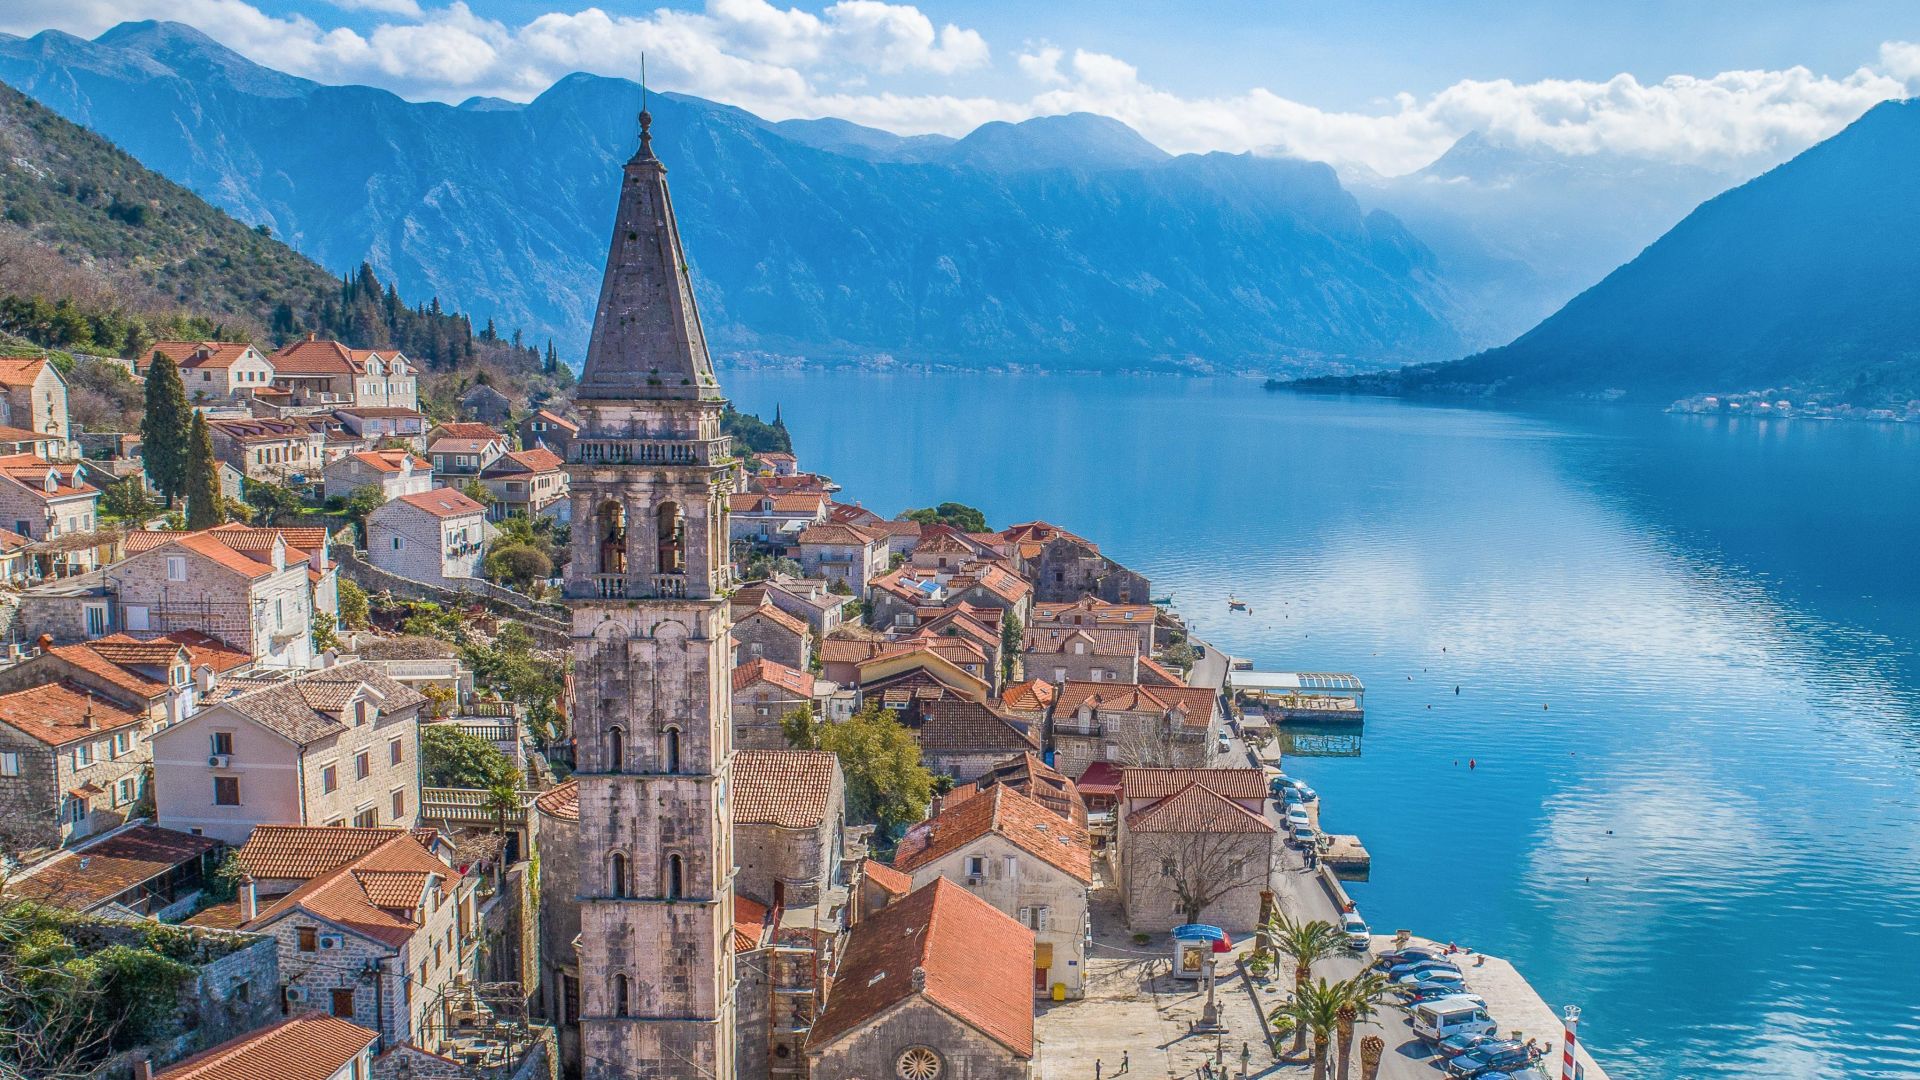 A View For Perast Old Town In Kotor Montenegro With The Sea And Mountains